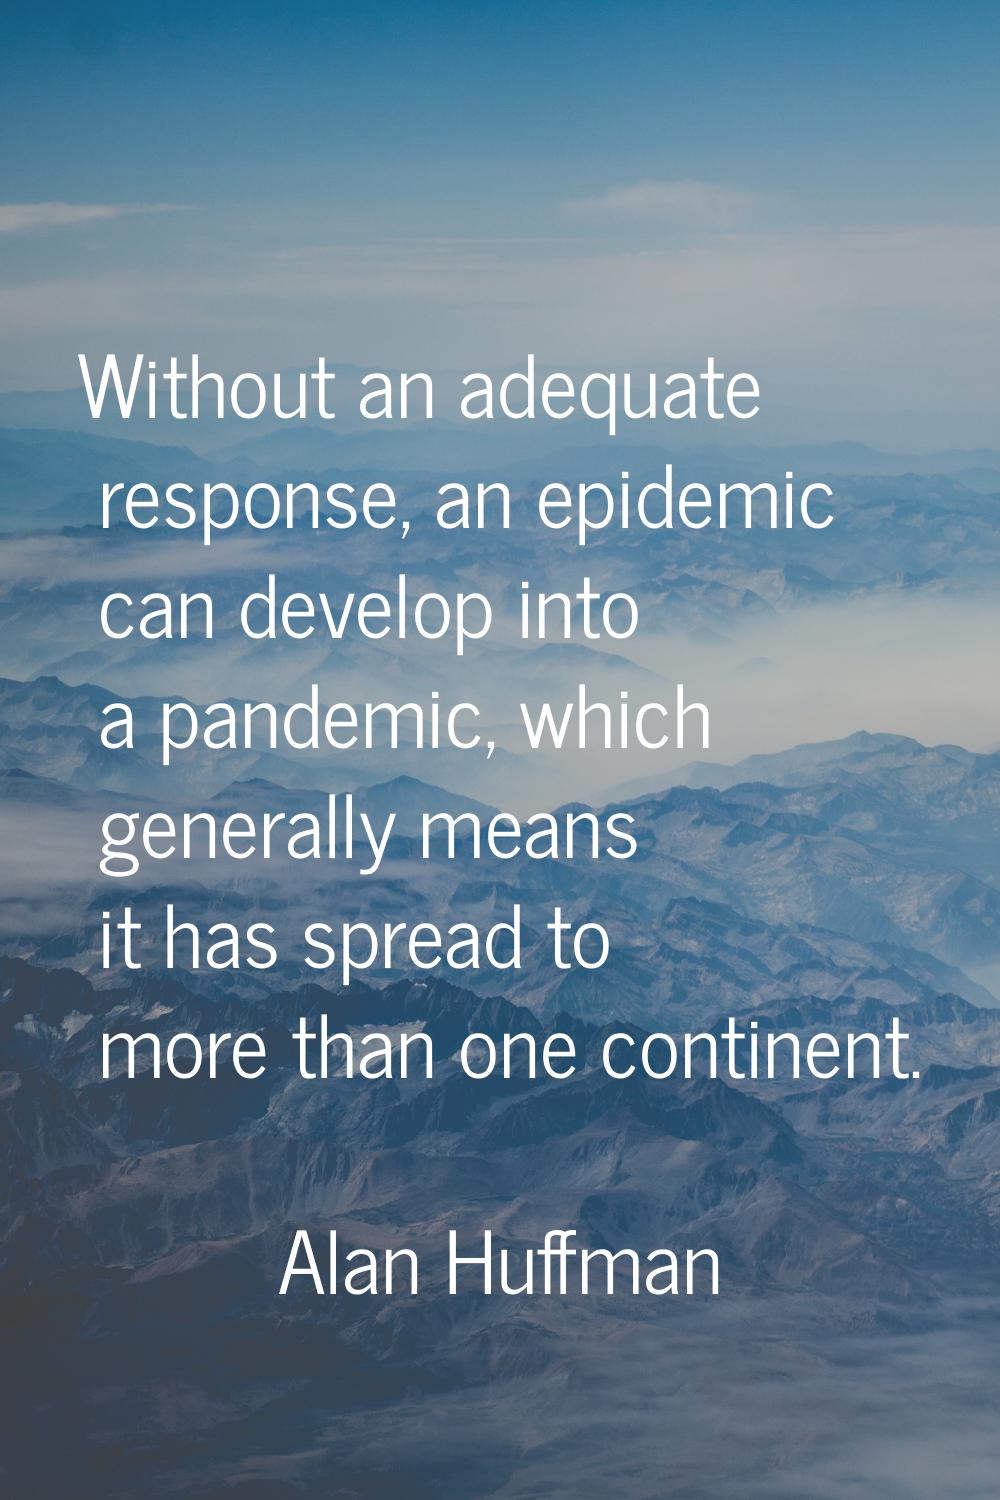 Without an adequate response, an epidemic can develop into a pandemic, which generally means it has